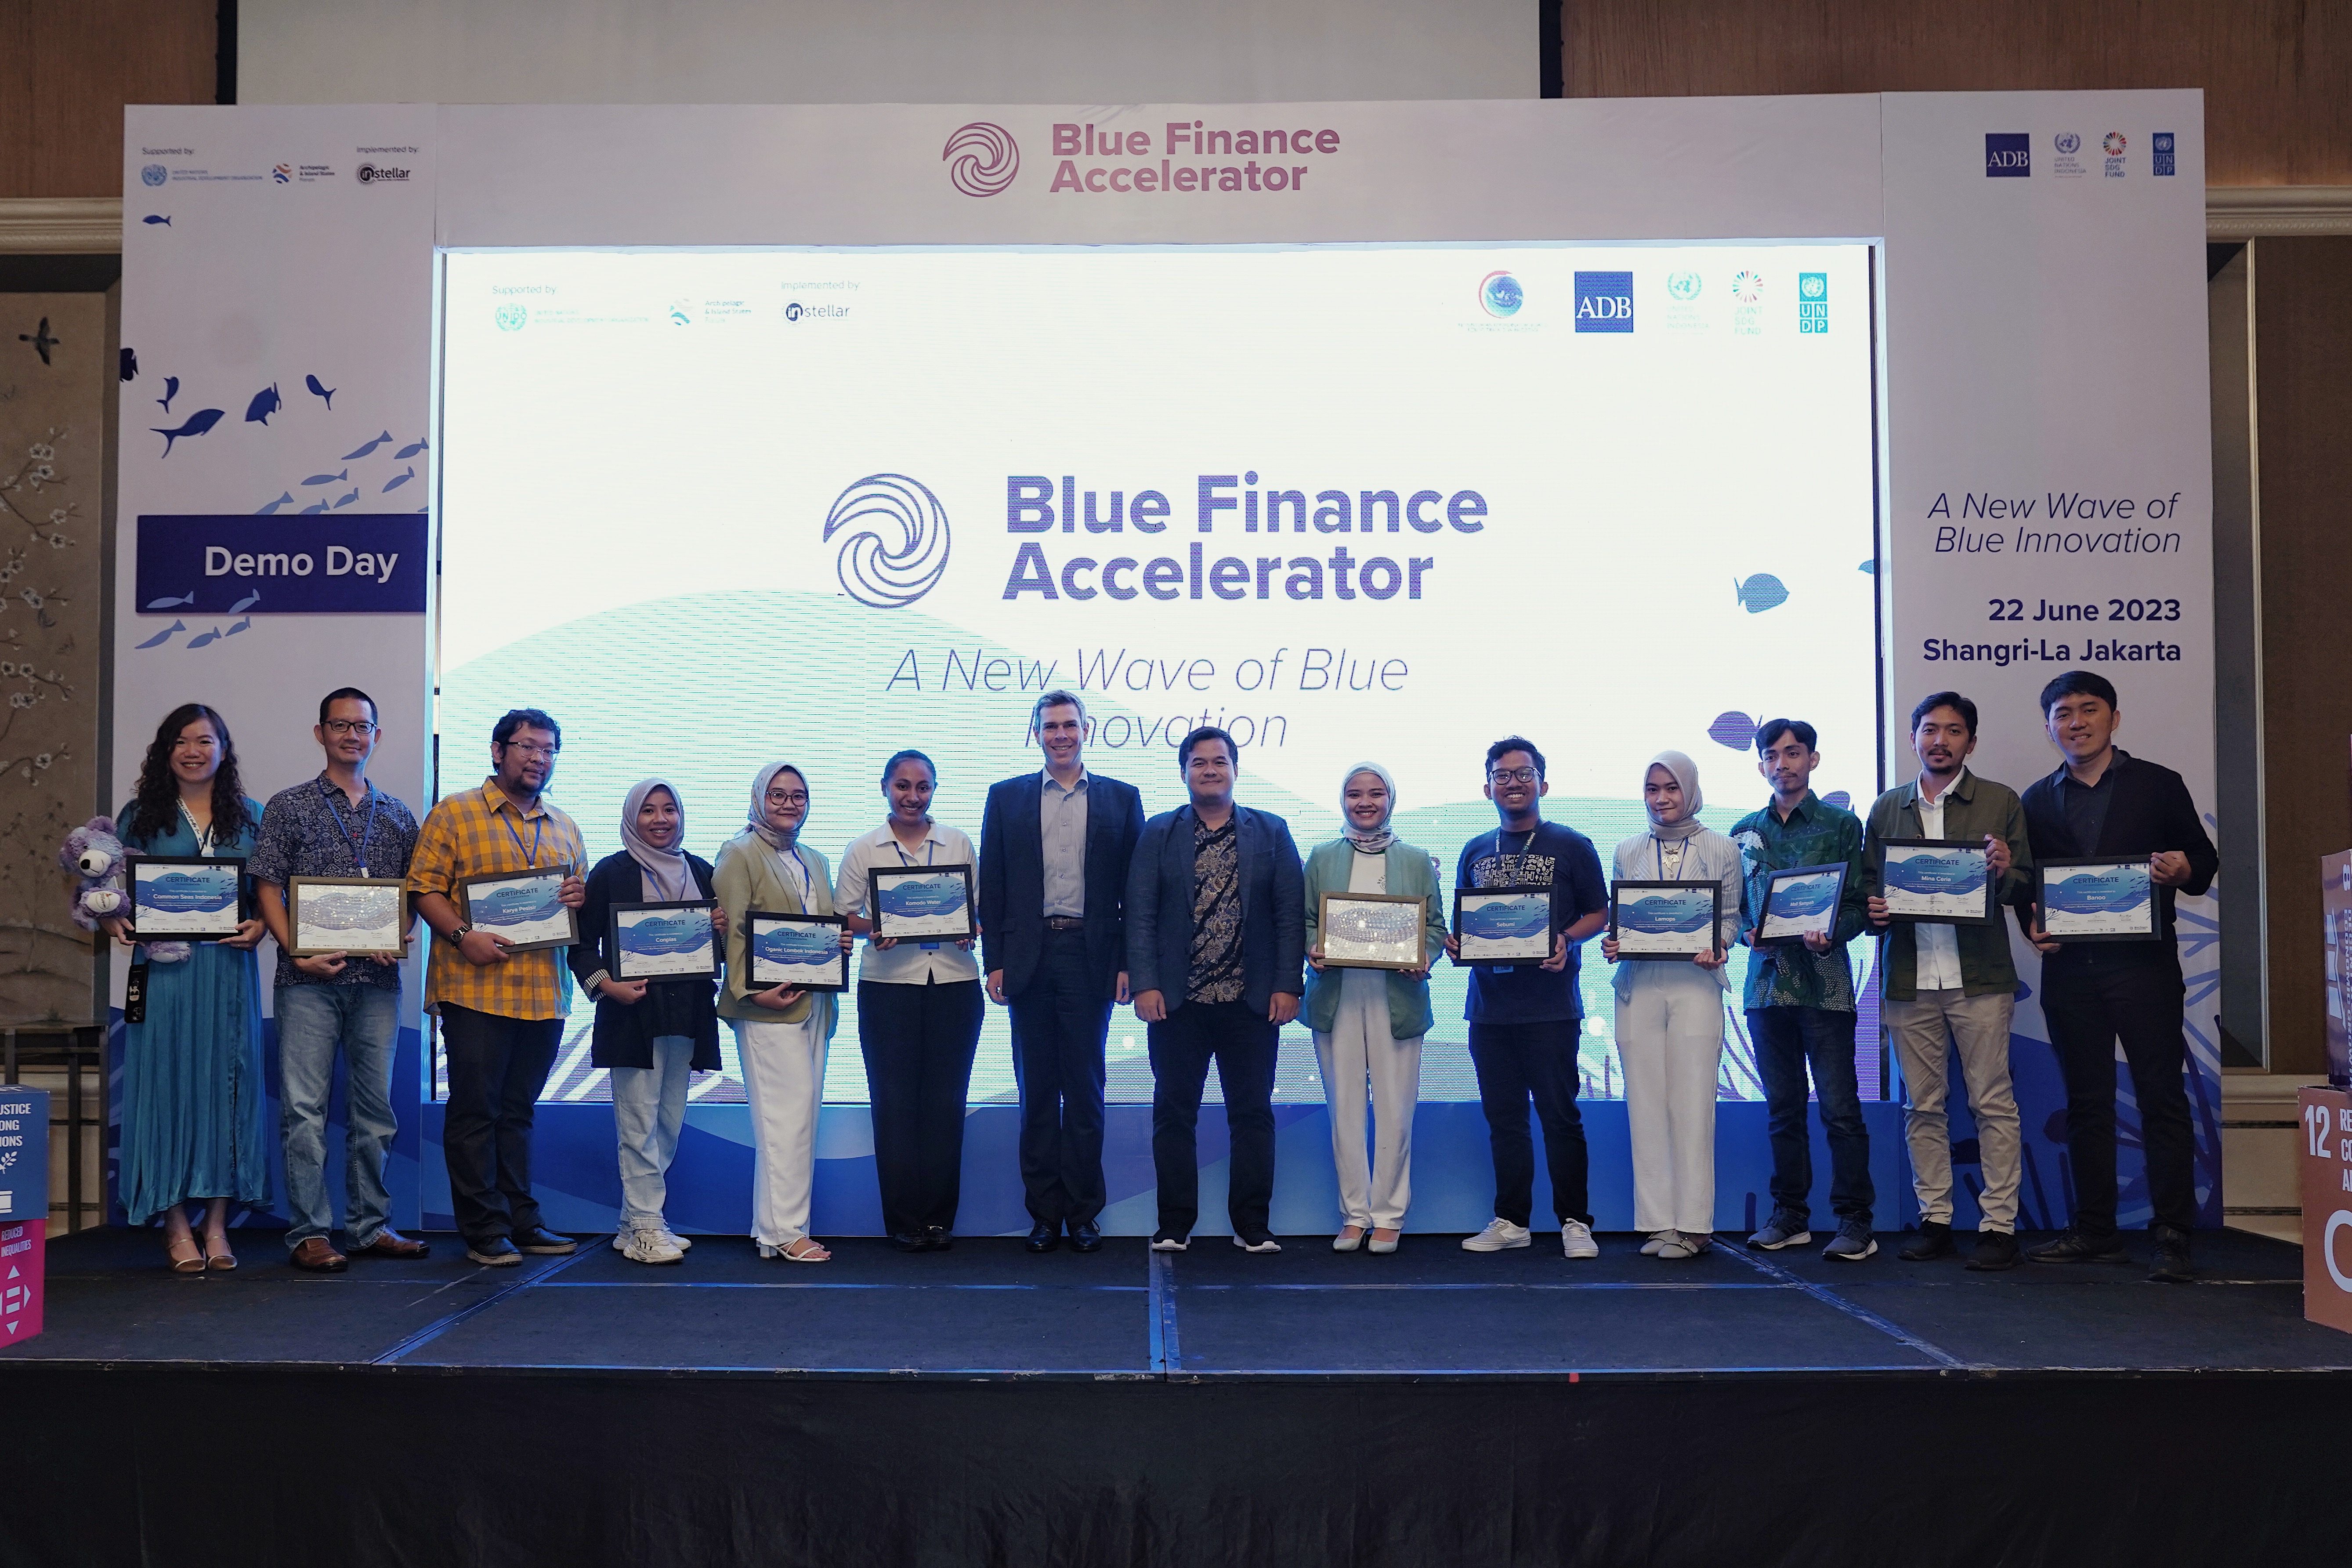 The Blue Finance Accelerator Demo Day event marked the final stage of the Blue Finance Accelerator (BFA) program, a joint initiative by  the Coordinating Ministry of Maritime Affairs & Investments, Asian Development Bank (ADB), and United Nations Development Programme (UNDP), under the UN ASSIST Joint Programme. 